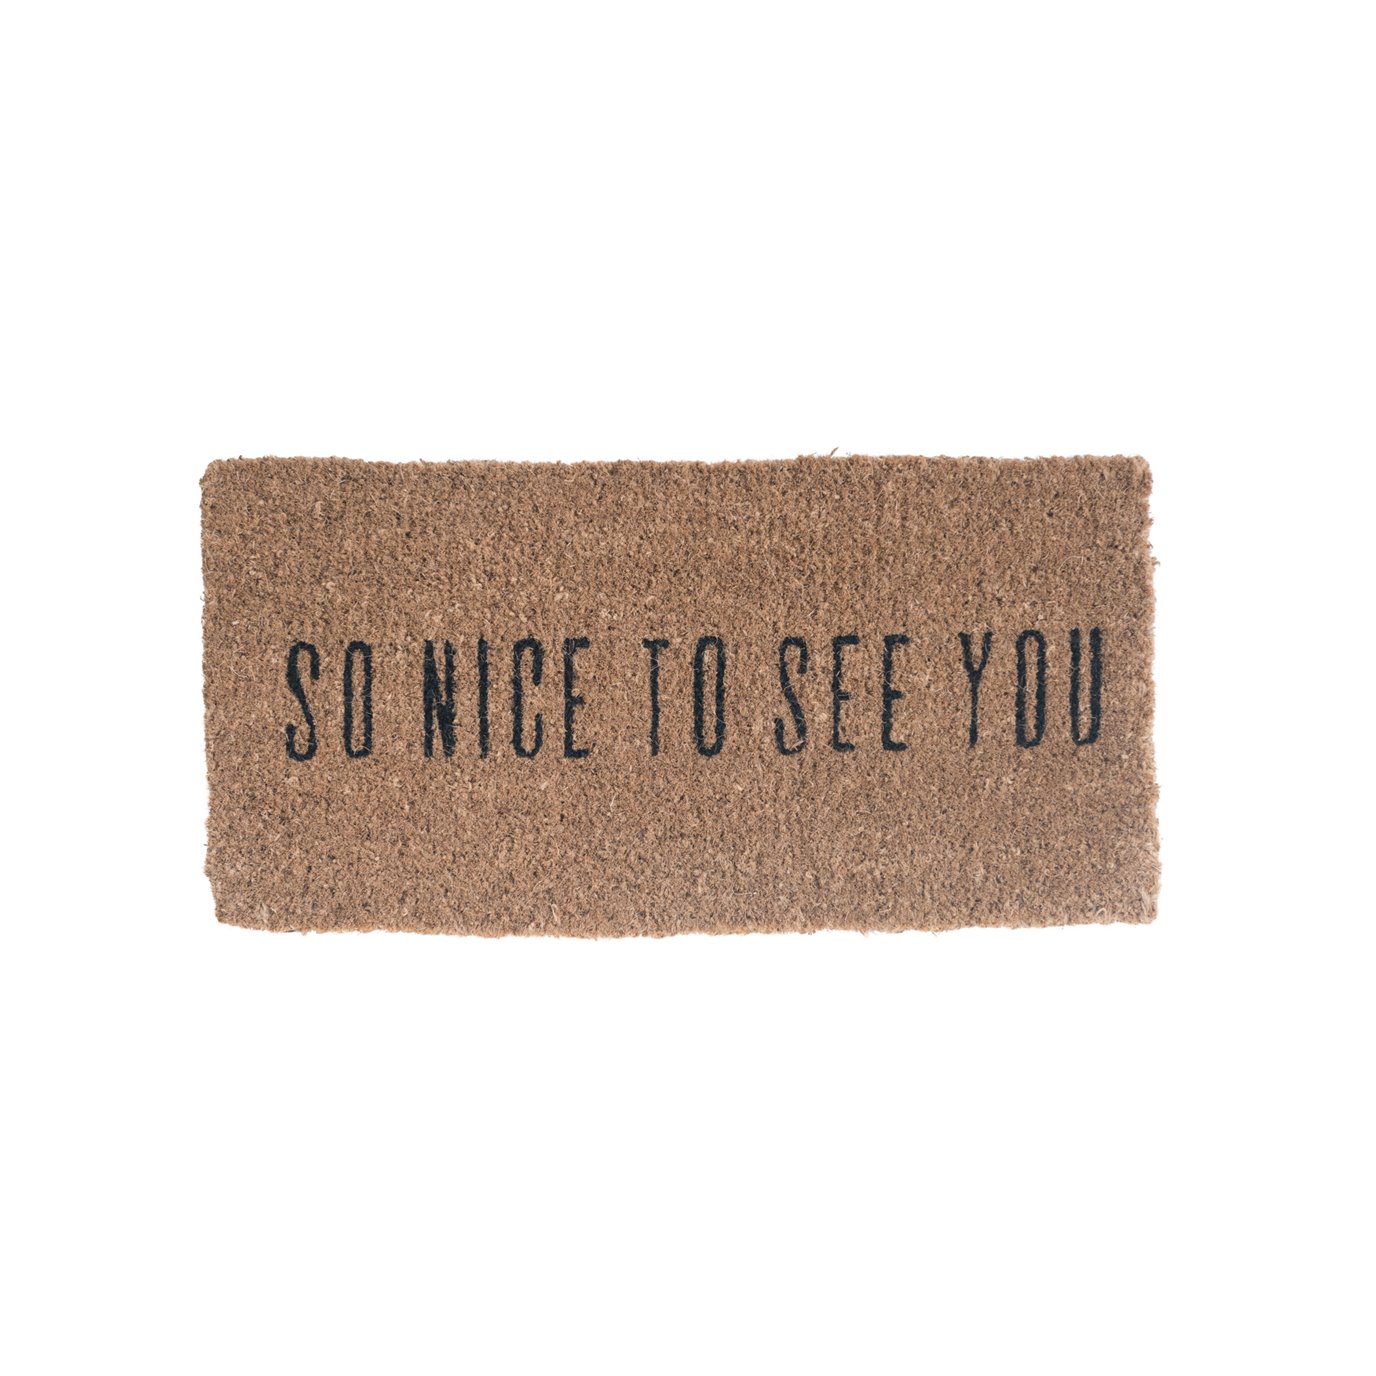 "So Nice to See You" Rectangle Natural Coir Doormat